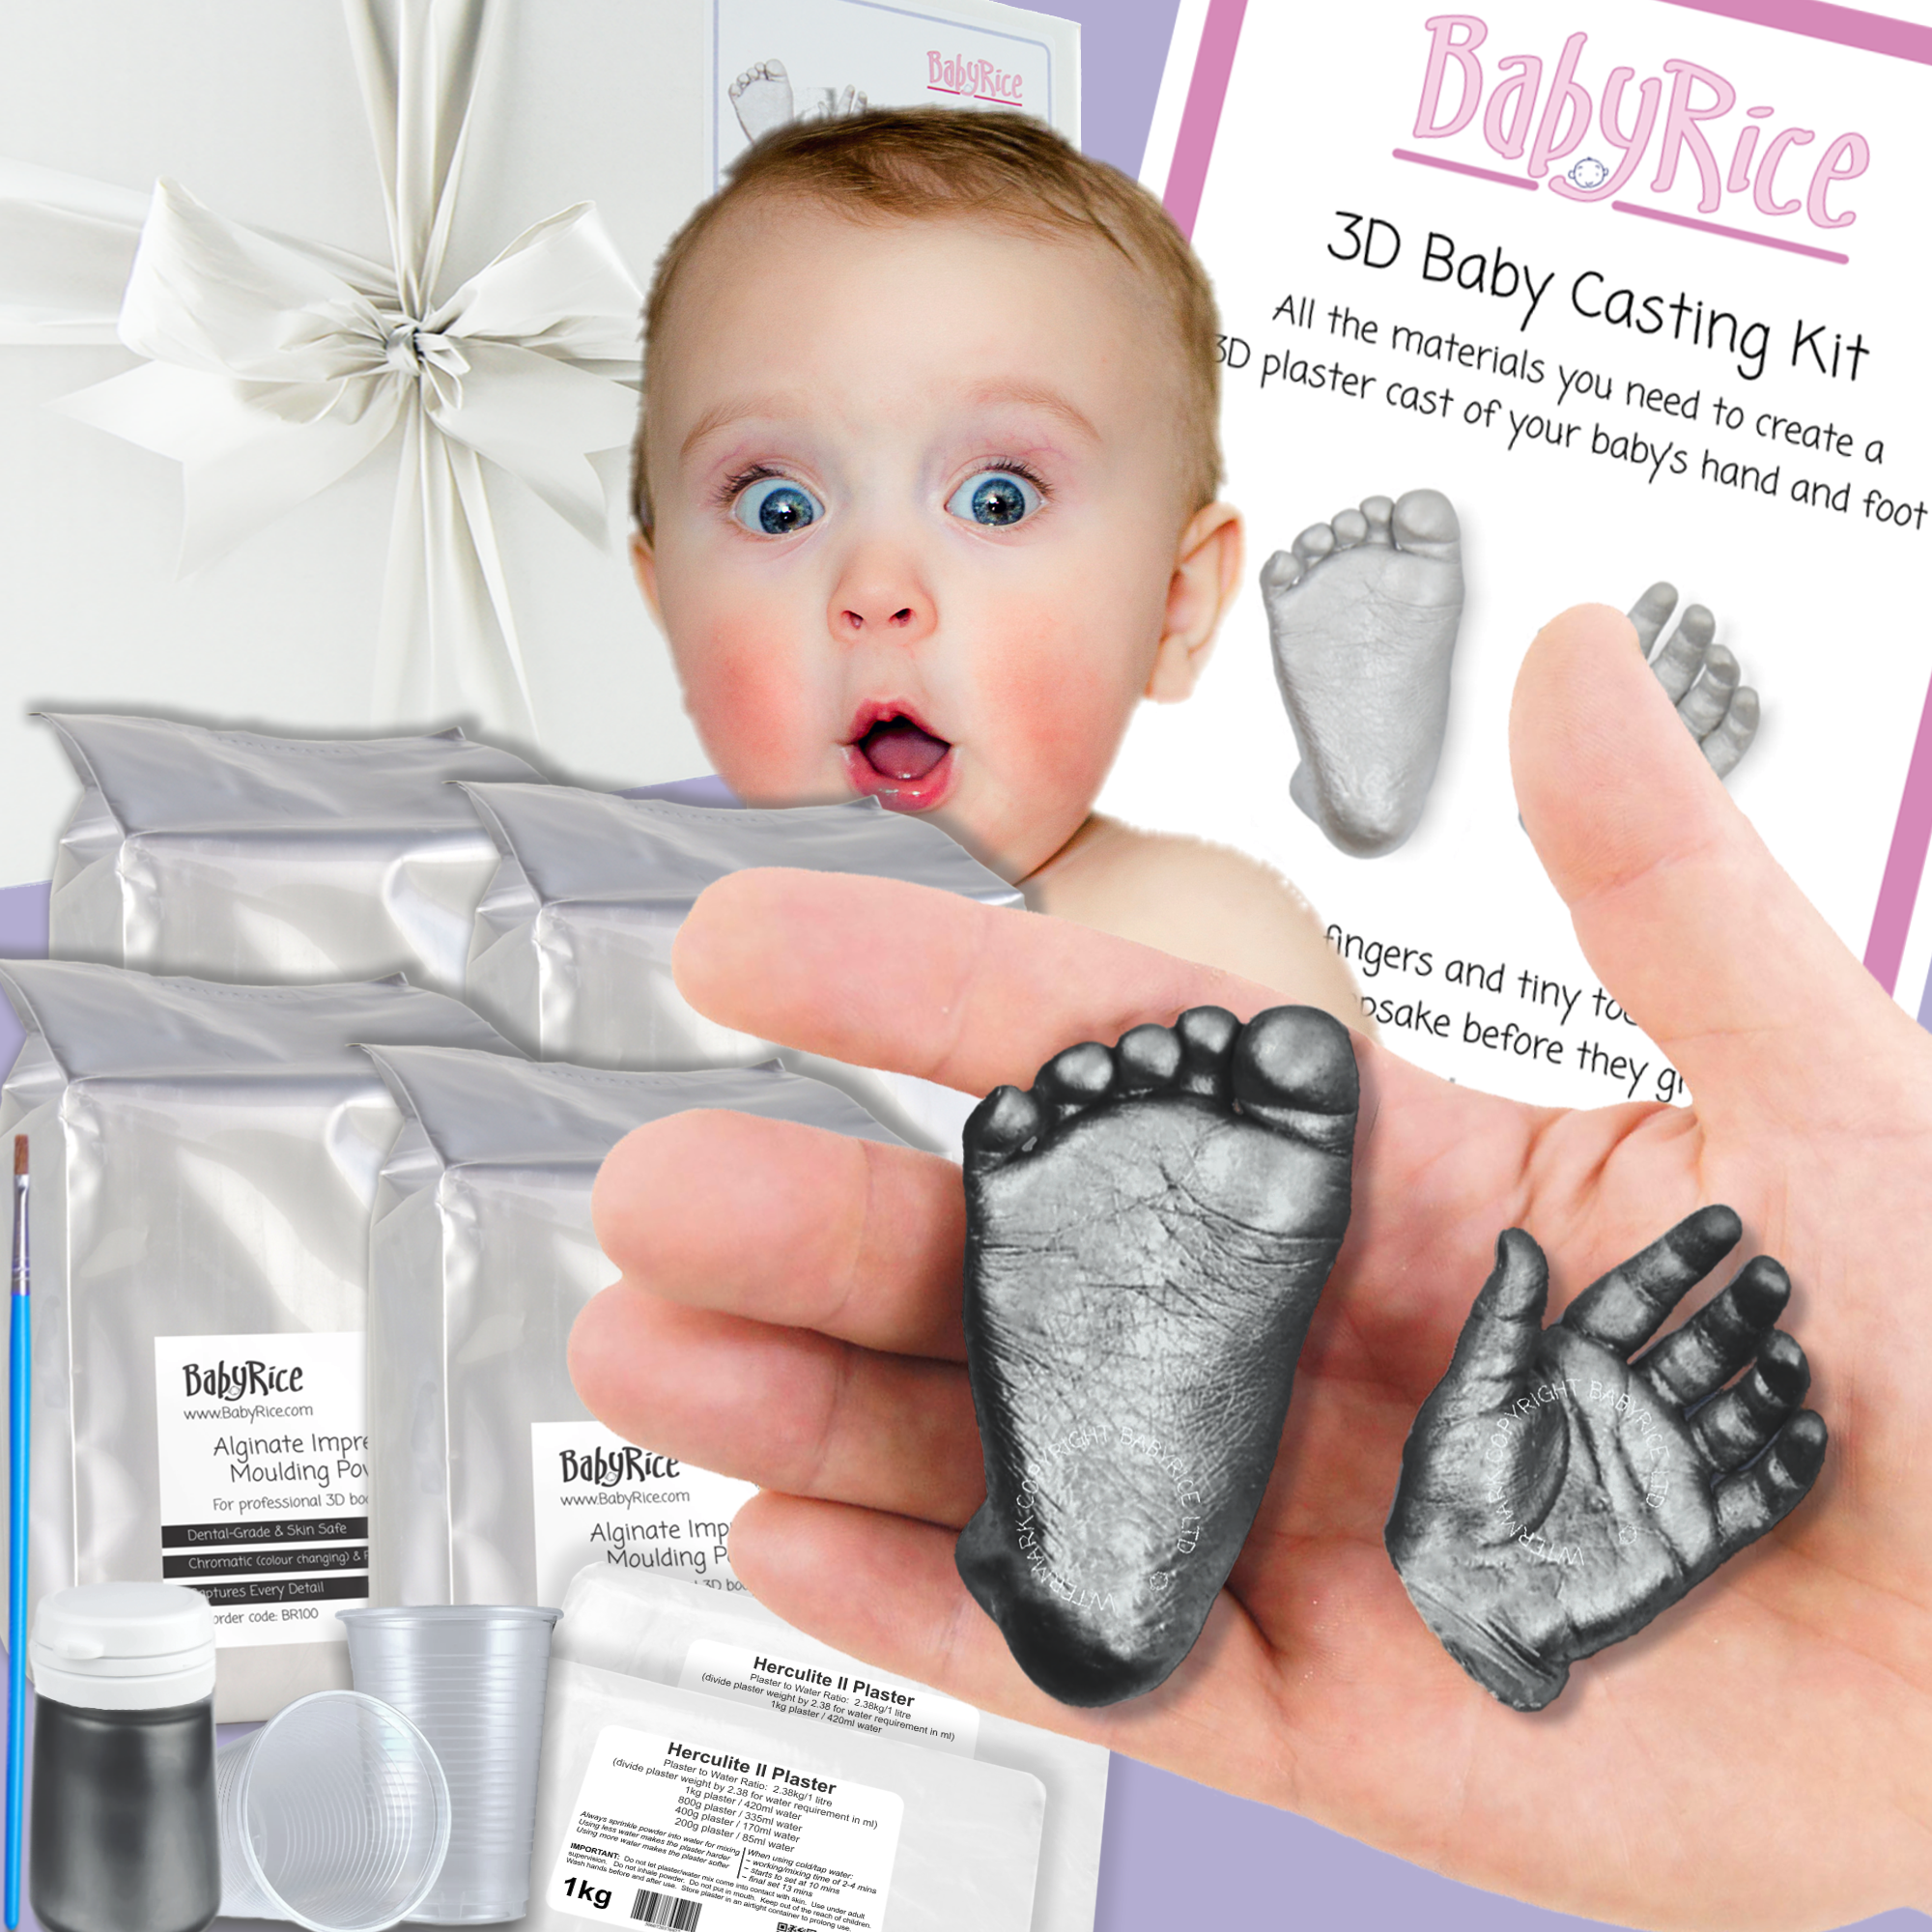 metallic pewter extra large twins baby hand foot 3d casts kit set